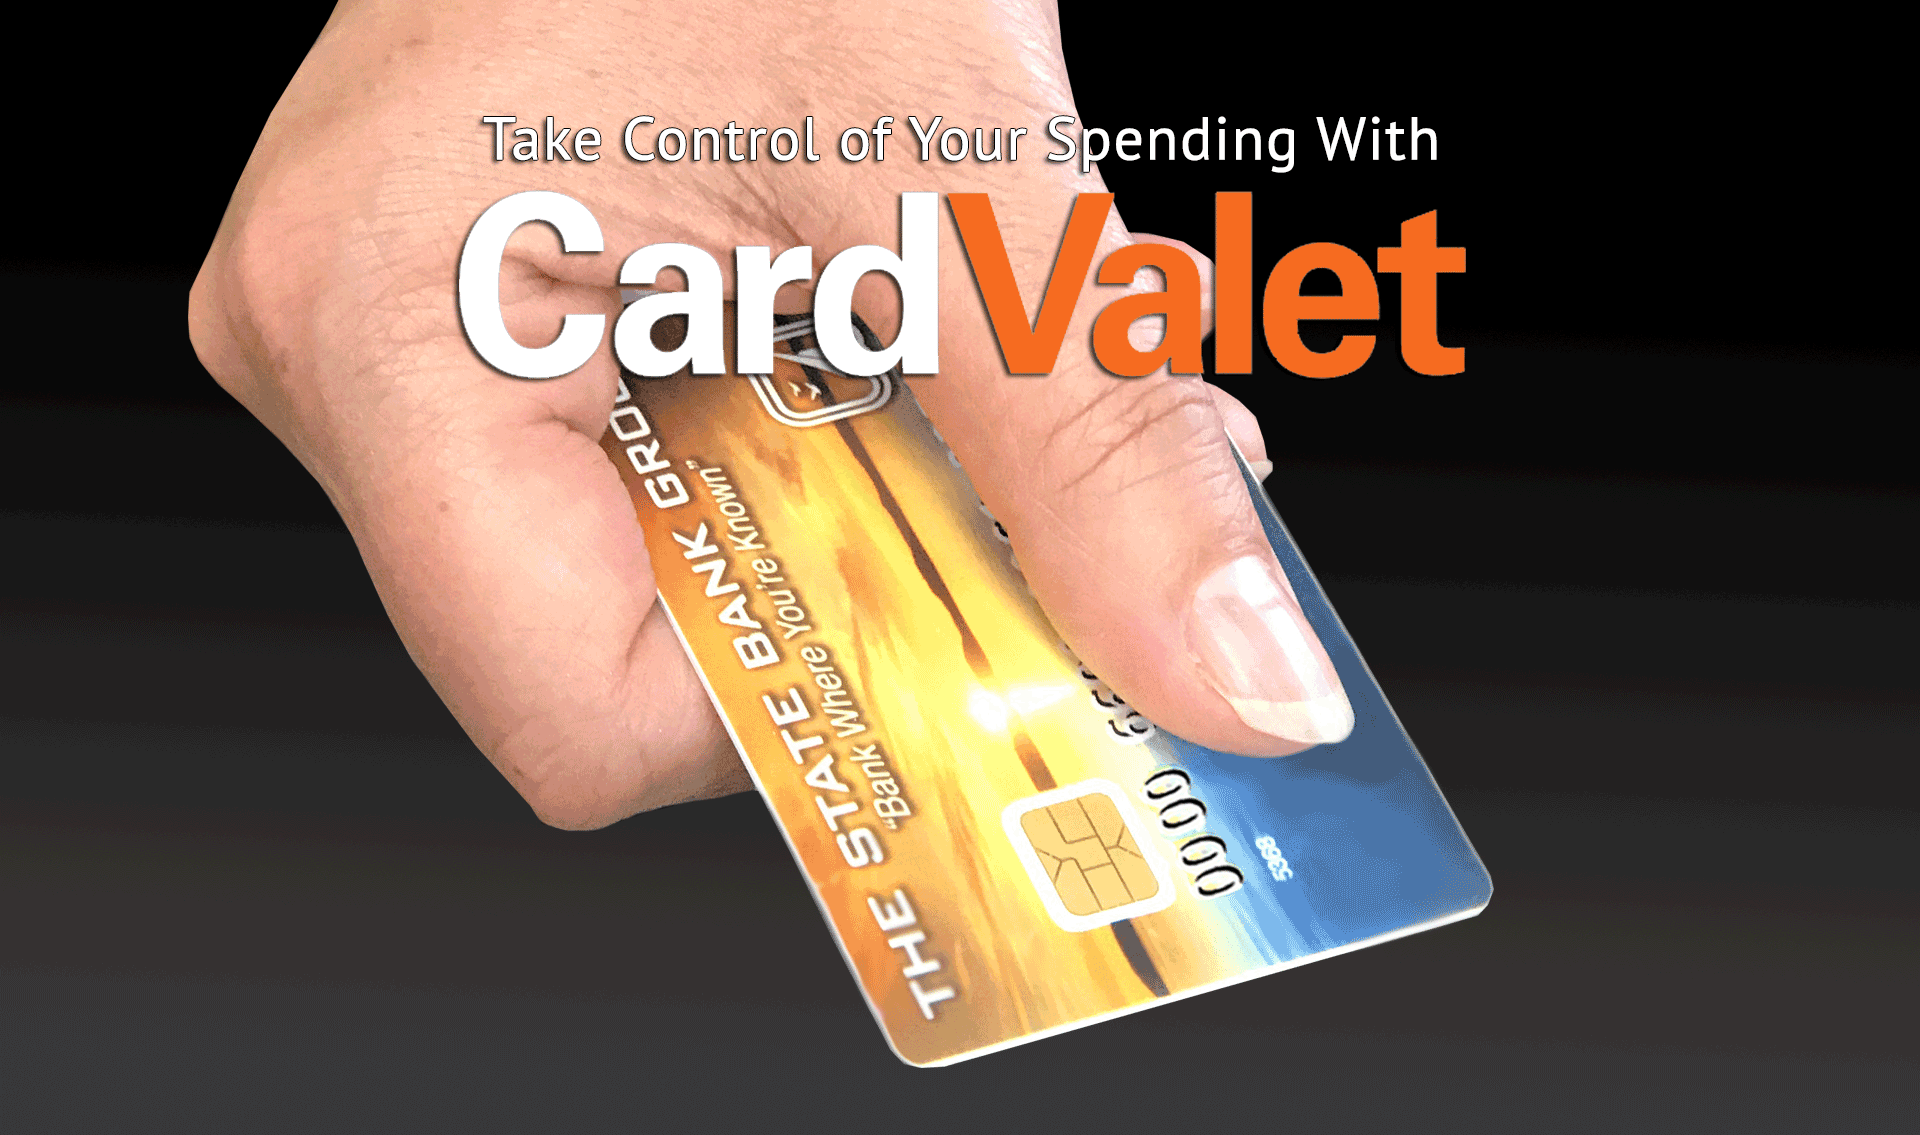 Control spending with CardValet